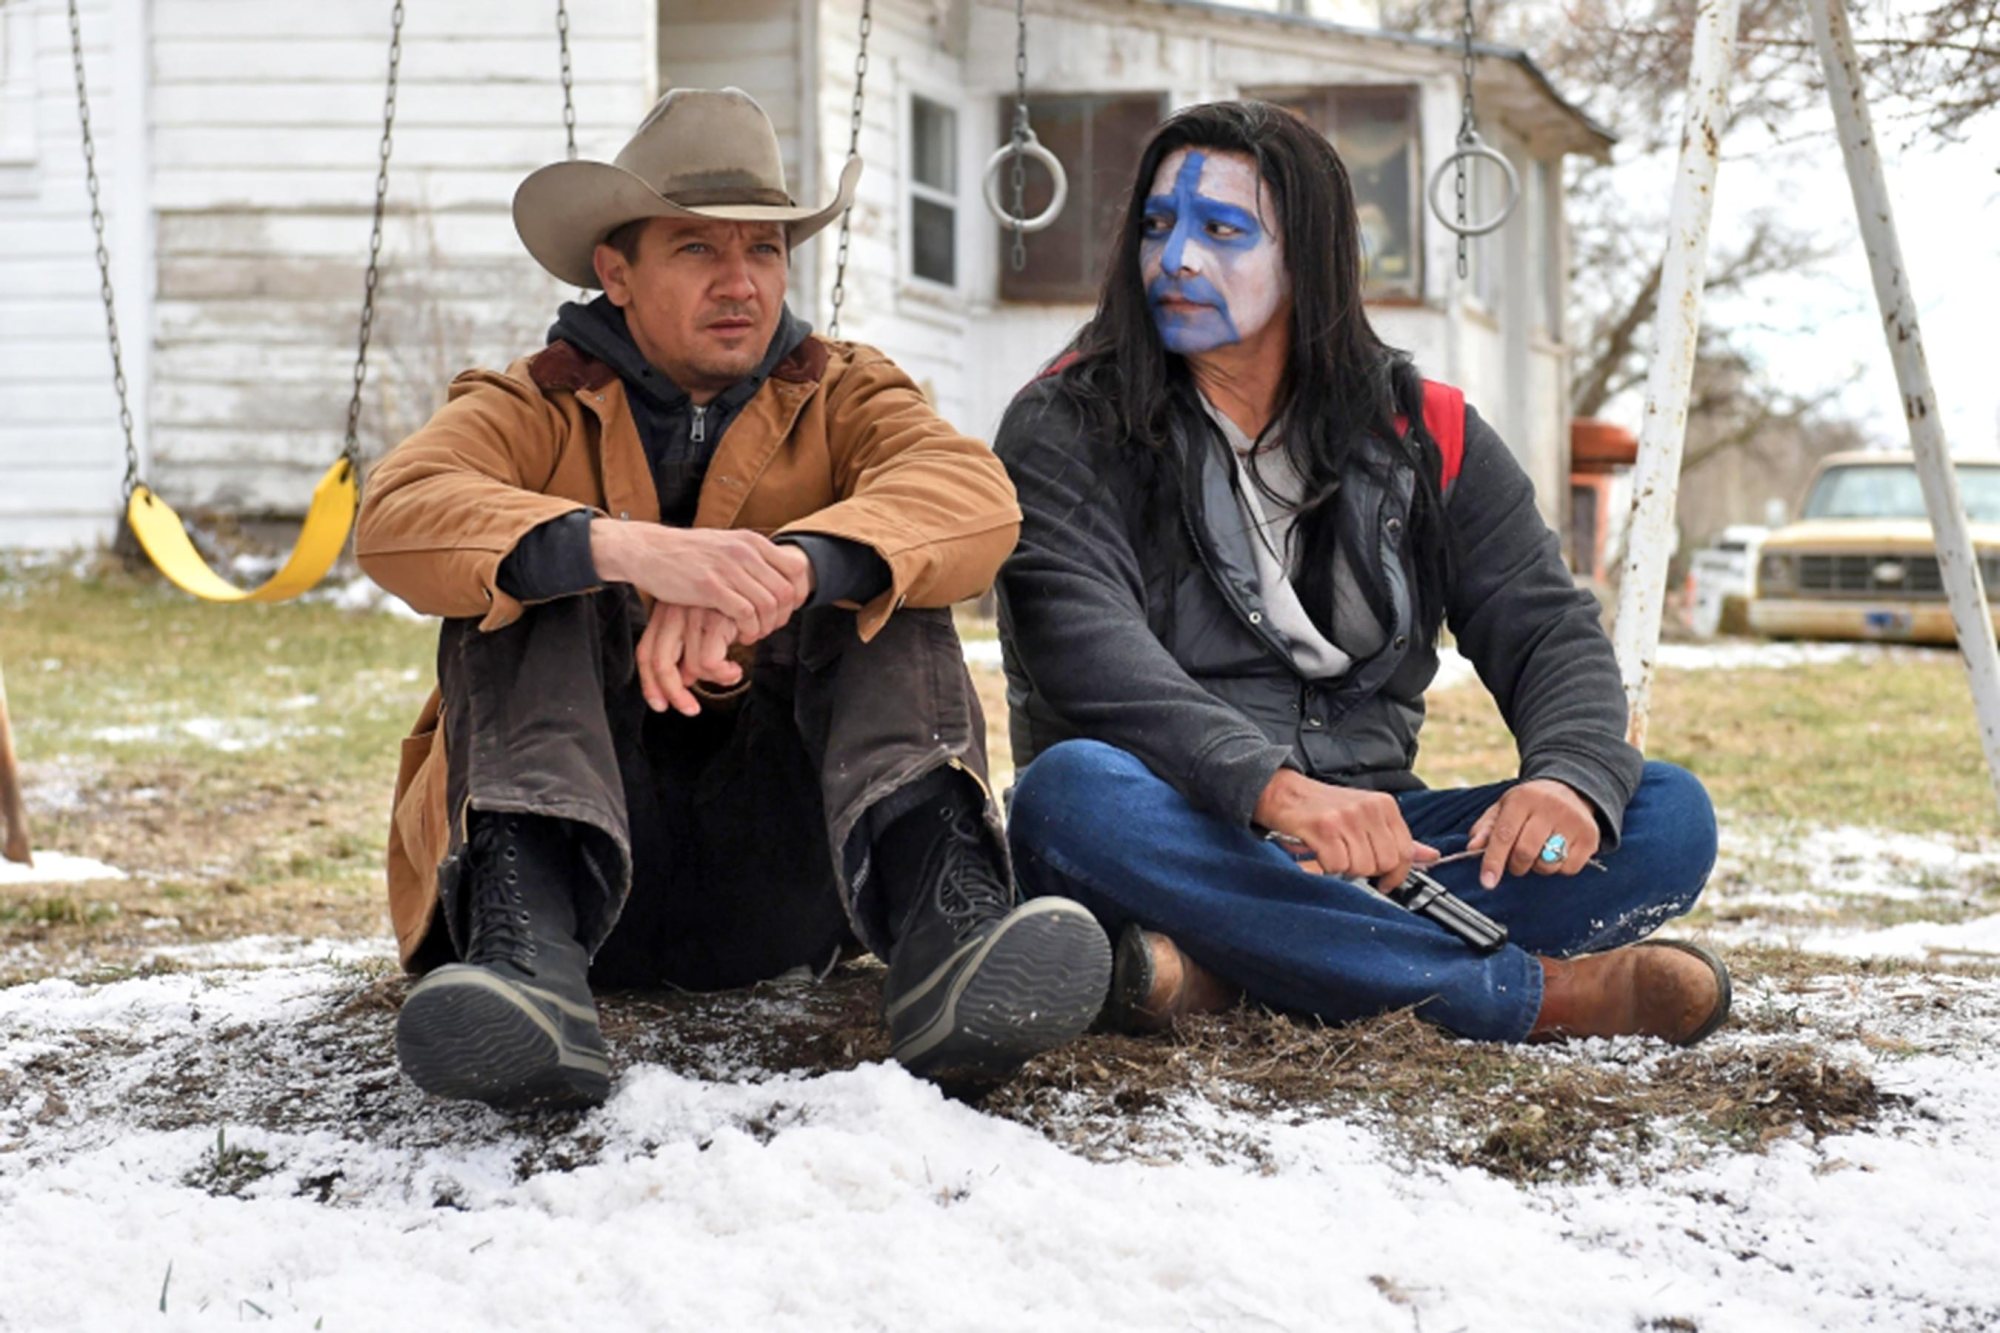 Wind river, movie review, lucas mirabella, jeremy renner